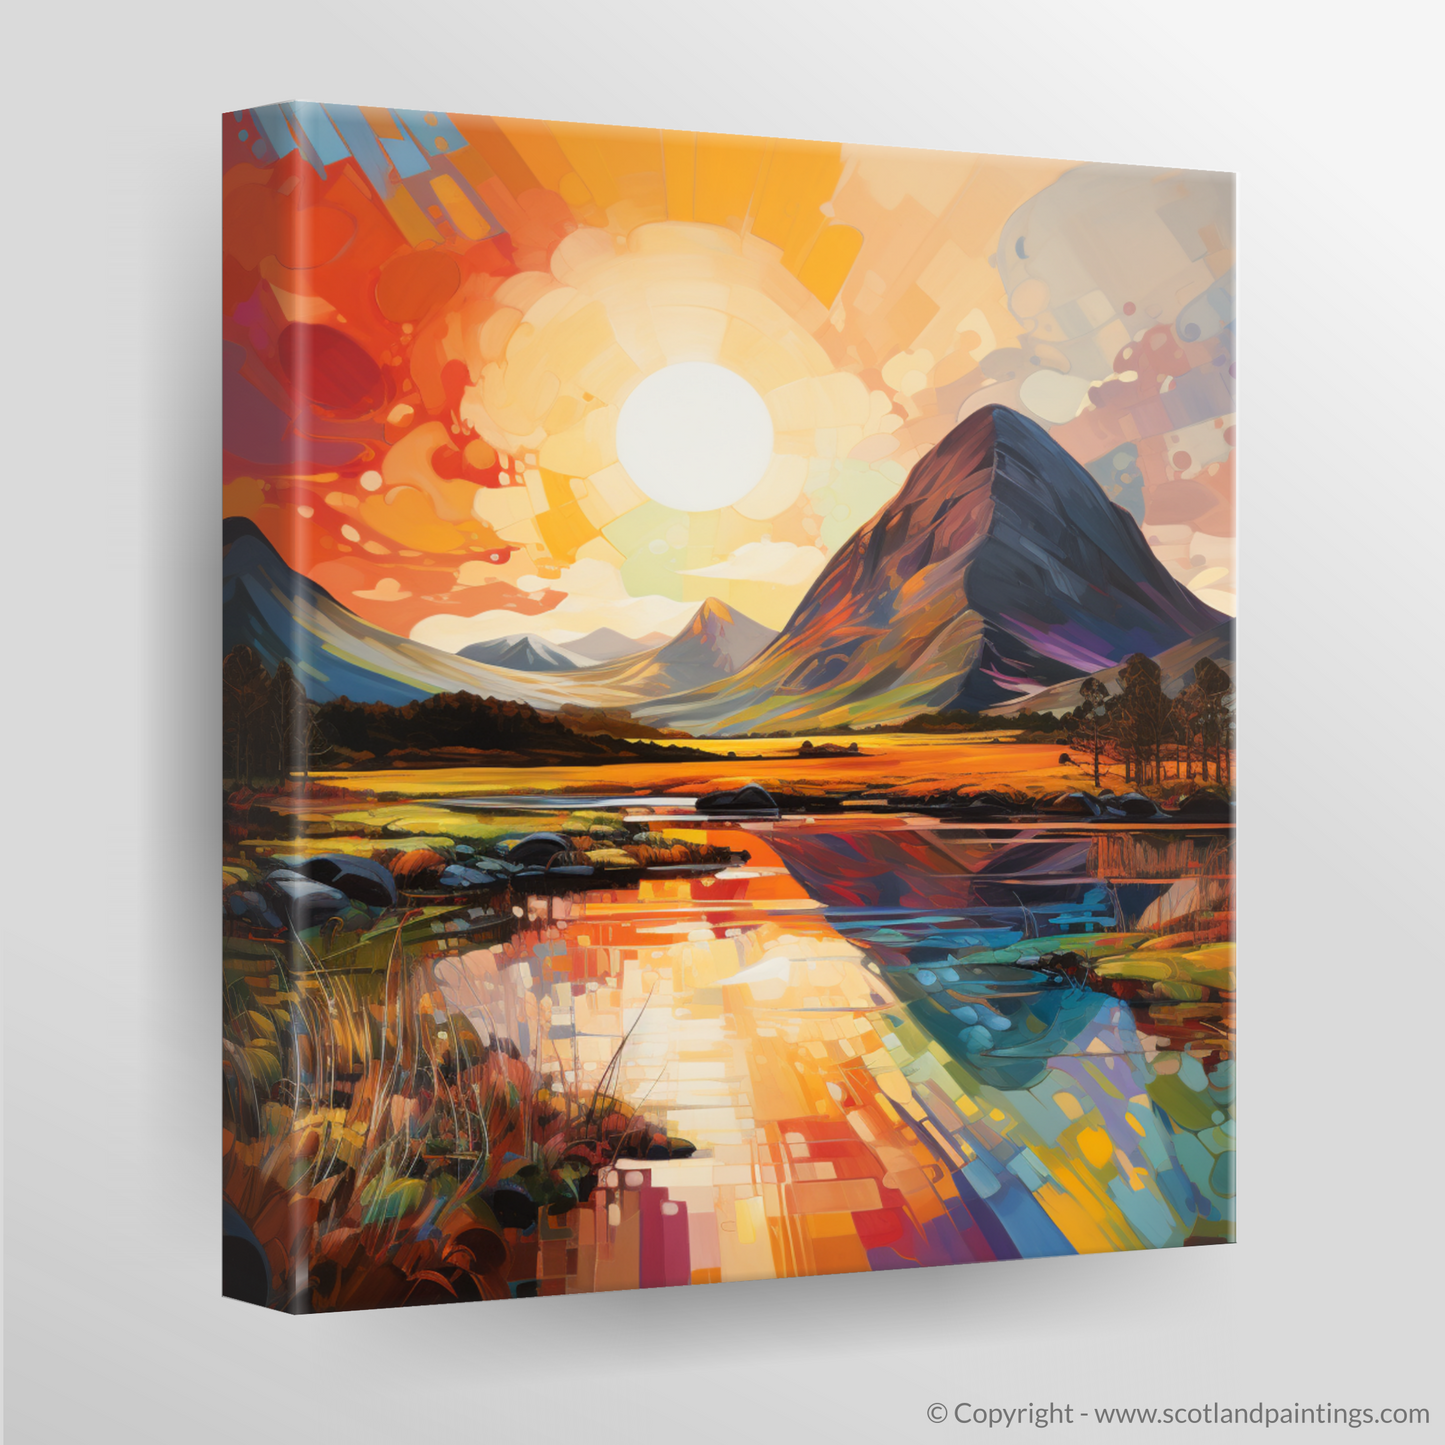 Buachaille Sunrise: A Symphony of Color Field Whispers